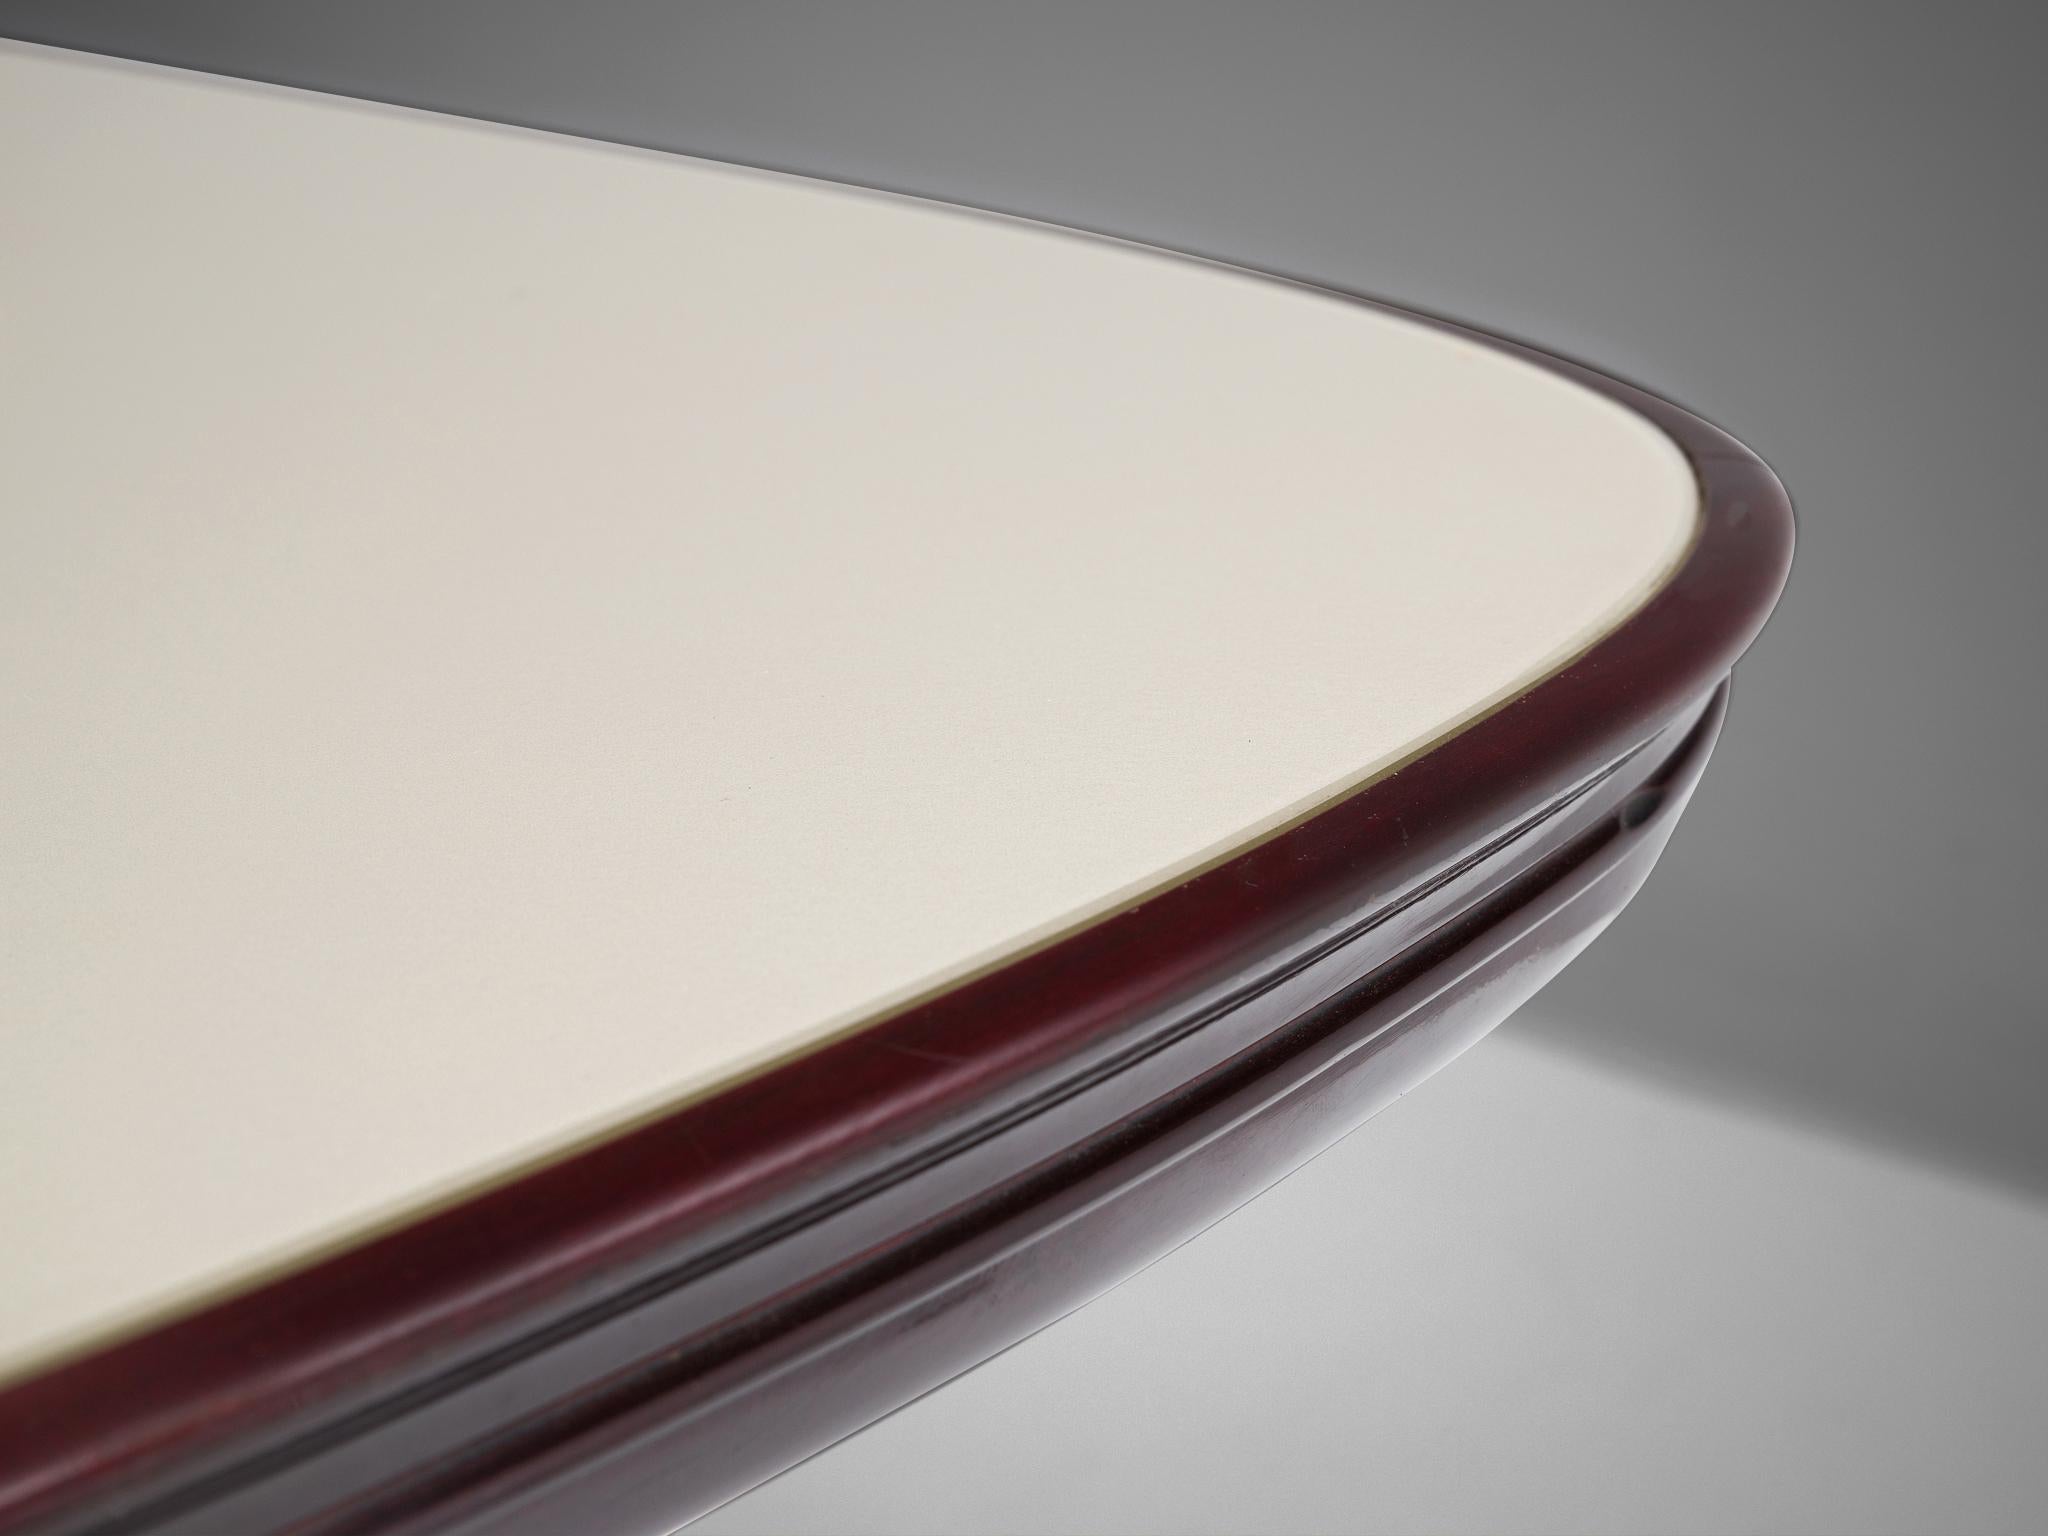 Dining table, marble, glass and mahogany, Italy, 1950s.

Luxurious table with a marble base and glass top in the style of Italian designer Vittorio Dassi. On a marble plate follows an organic and amorph shaped base consisting out of two V-shaped